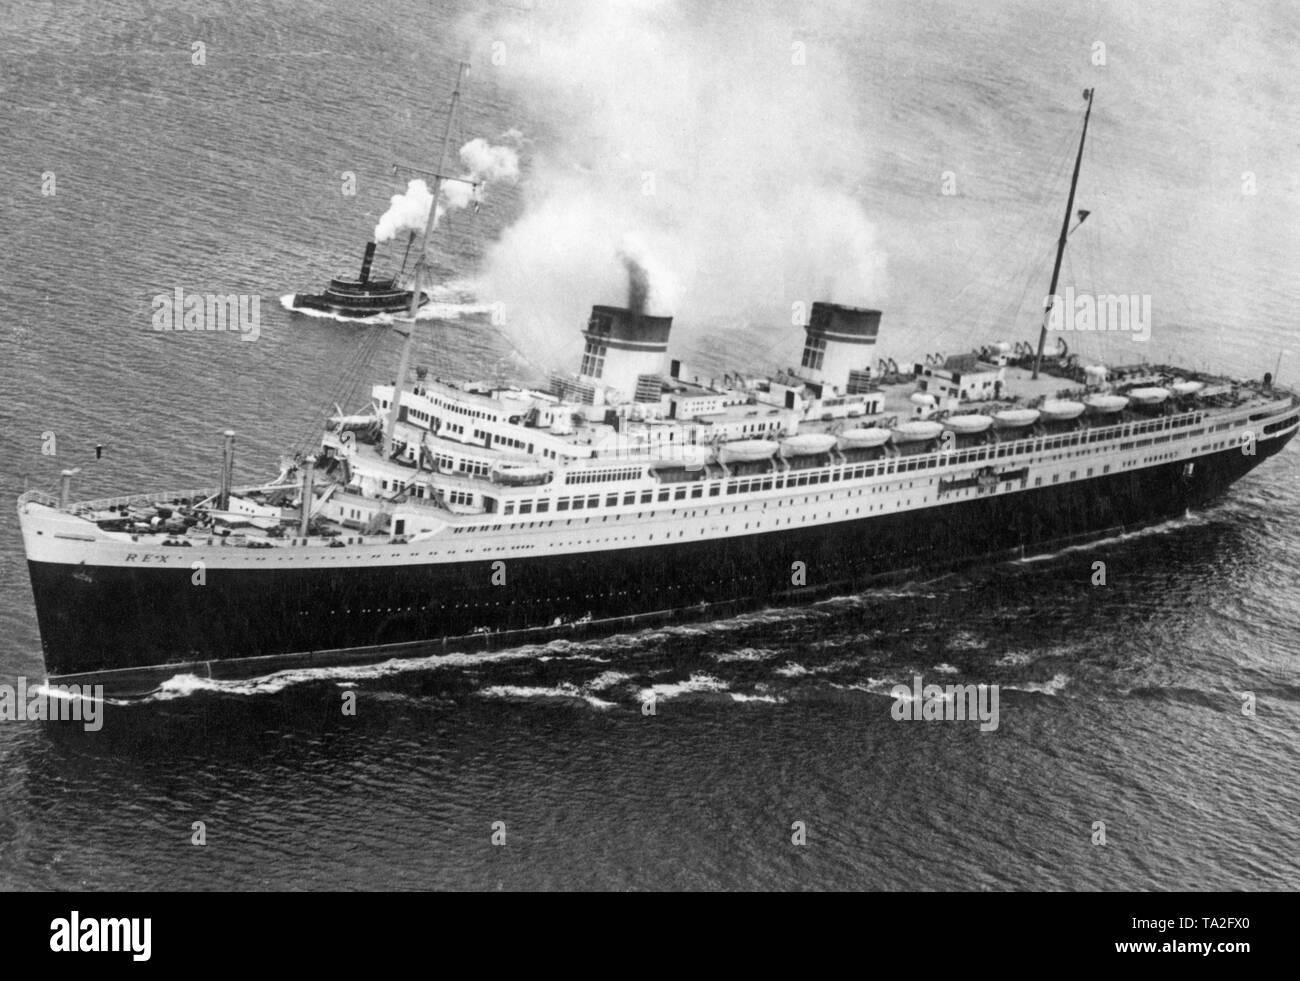 The Italian ocean liner "Rex" at sea. The "Rex" was intended to underline  the claim of the Fascist regime in Italy, for a firm place on the then  popular and profitable Atlantic